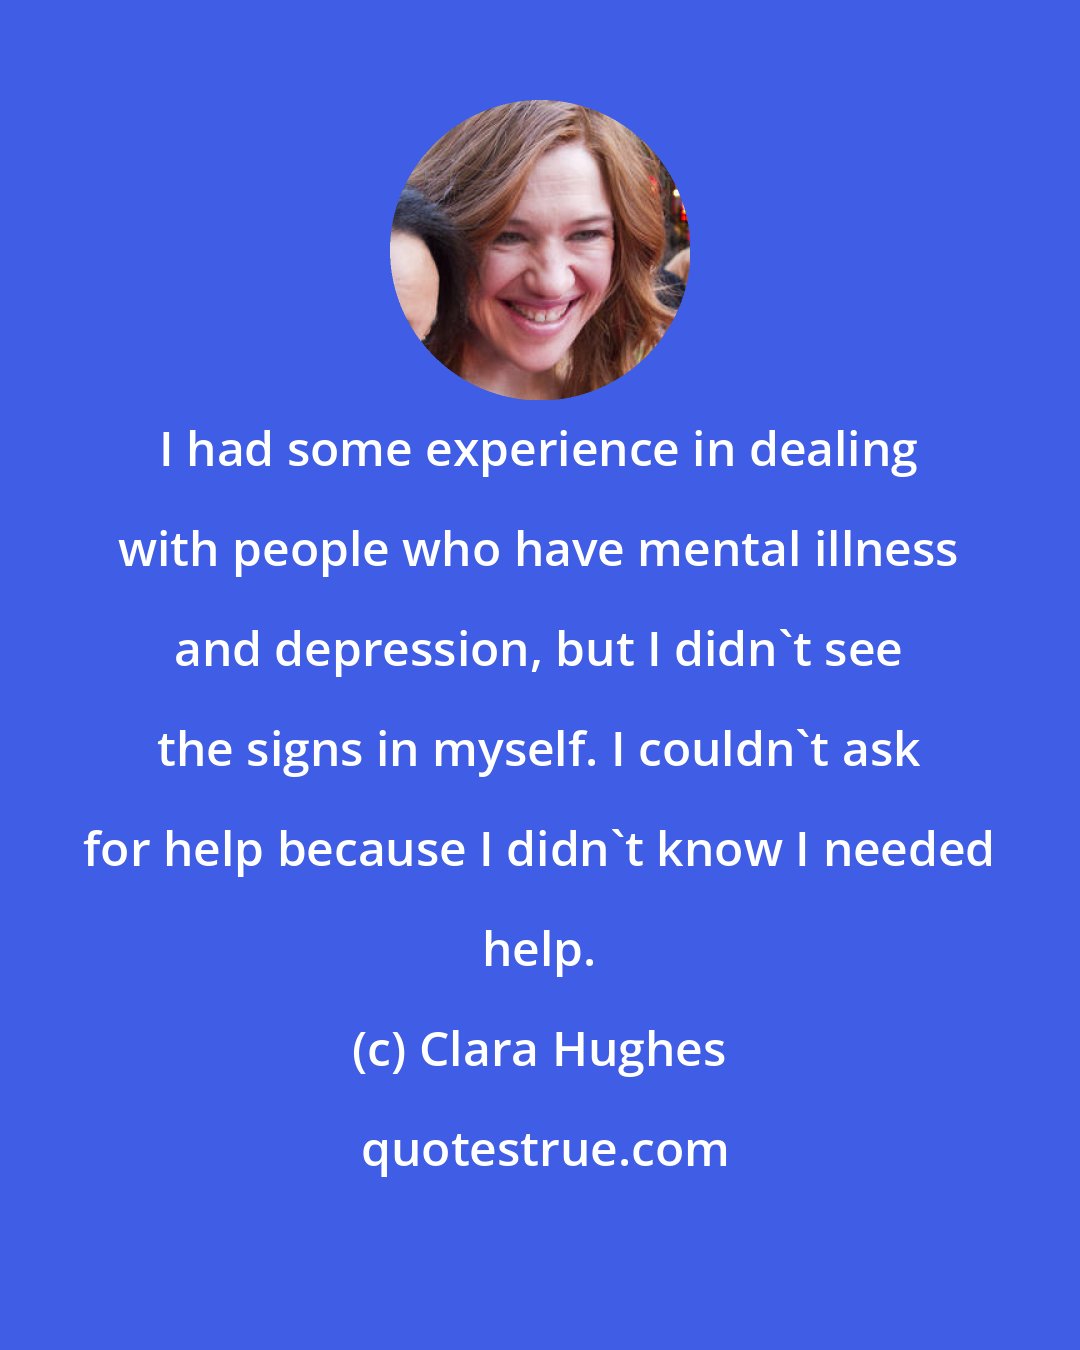 Clara Hughes: I had some experience in dealing with people who have mental illness and depression, but I didn't see the signs in myself. I couldn't ask for help because I didn't know I needed help.